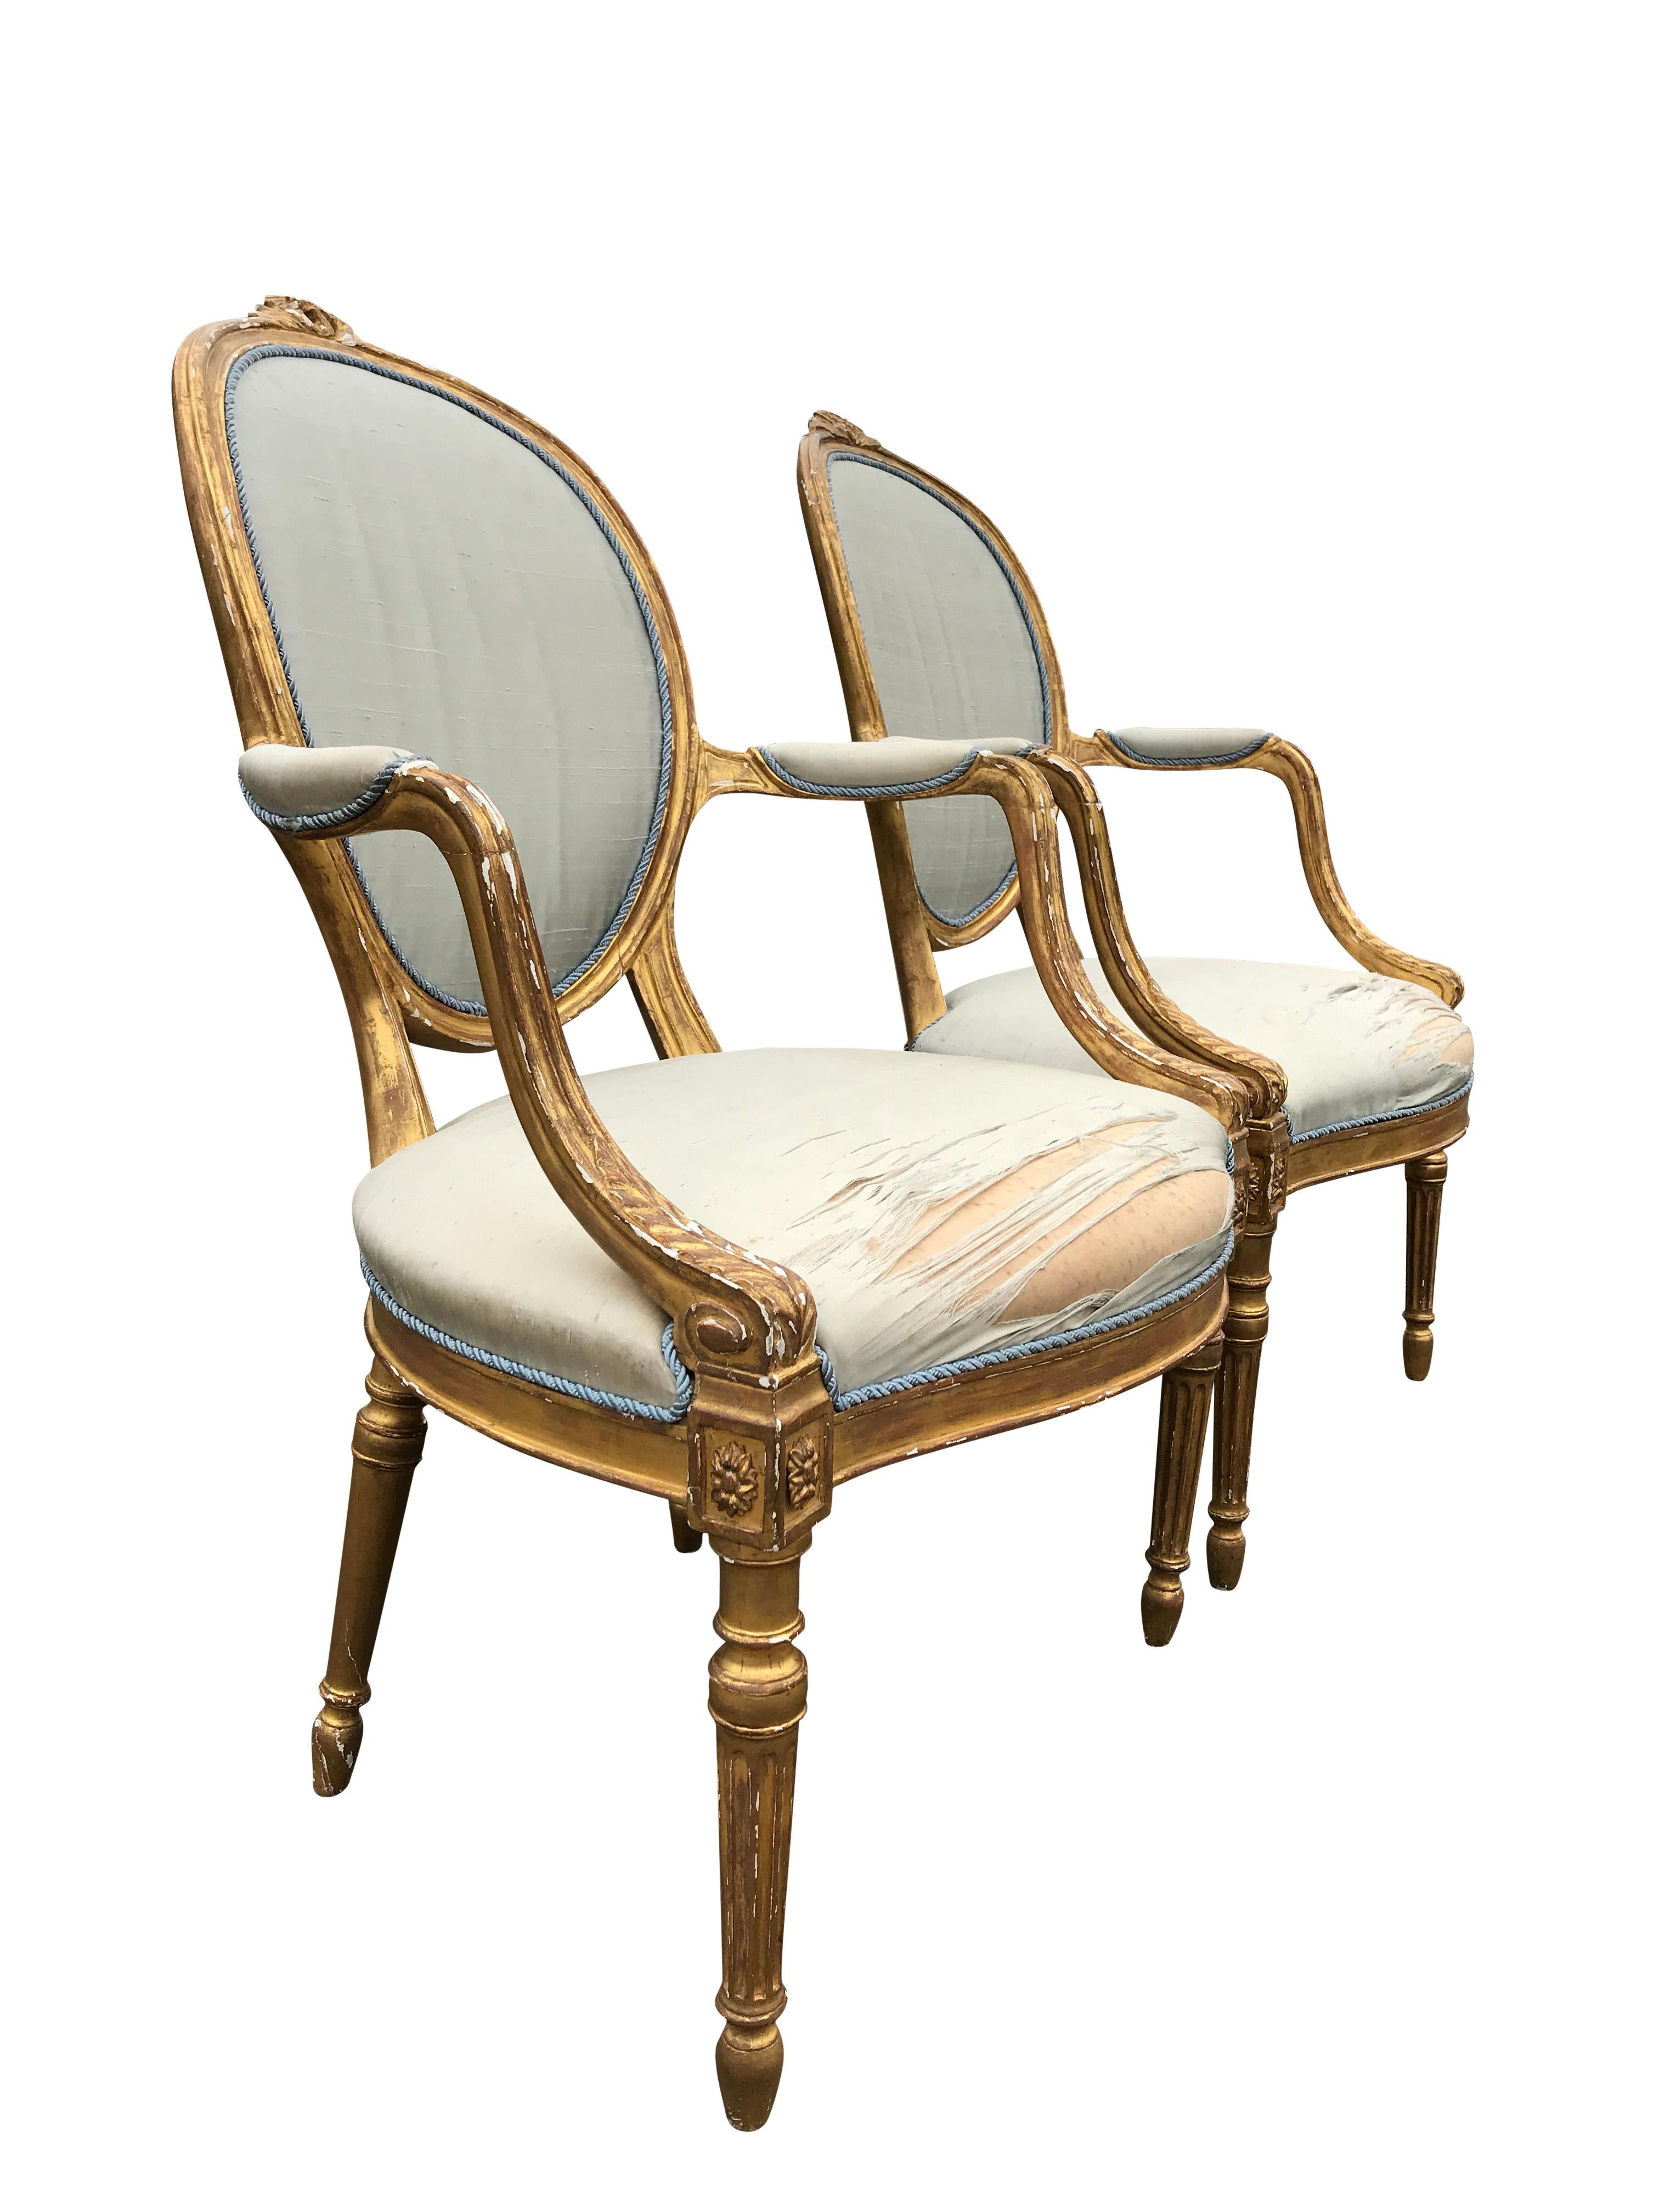 Elegant pair of water gilded open armchairs, of generous proportions, in the manner of George Hepplewhite. The silk fabric and frames are elegantly distressed but structurally sound.